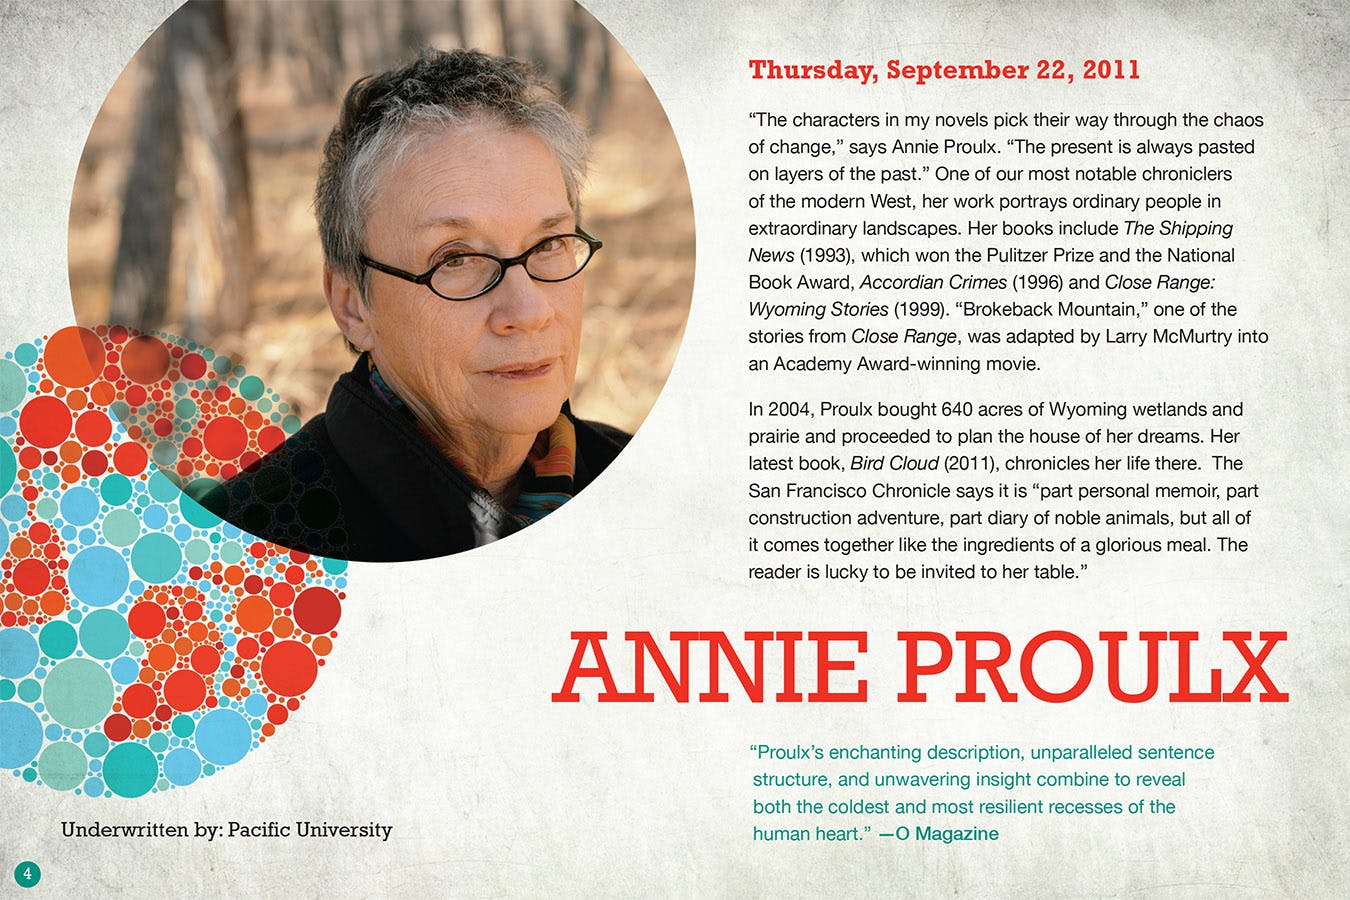 Image from Literary Arts; Annie Proulx